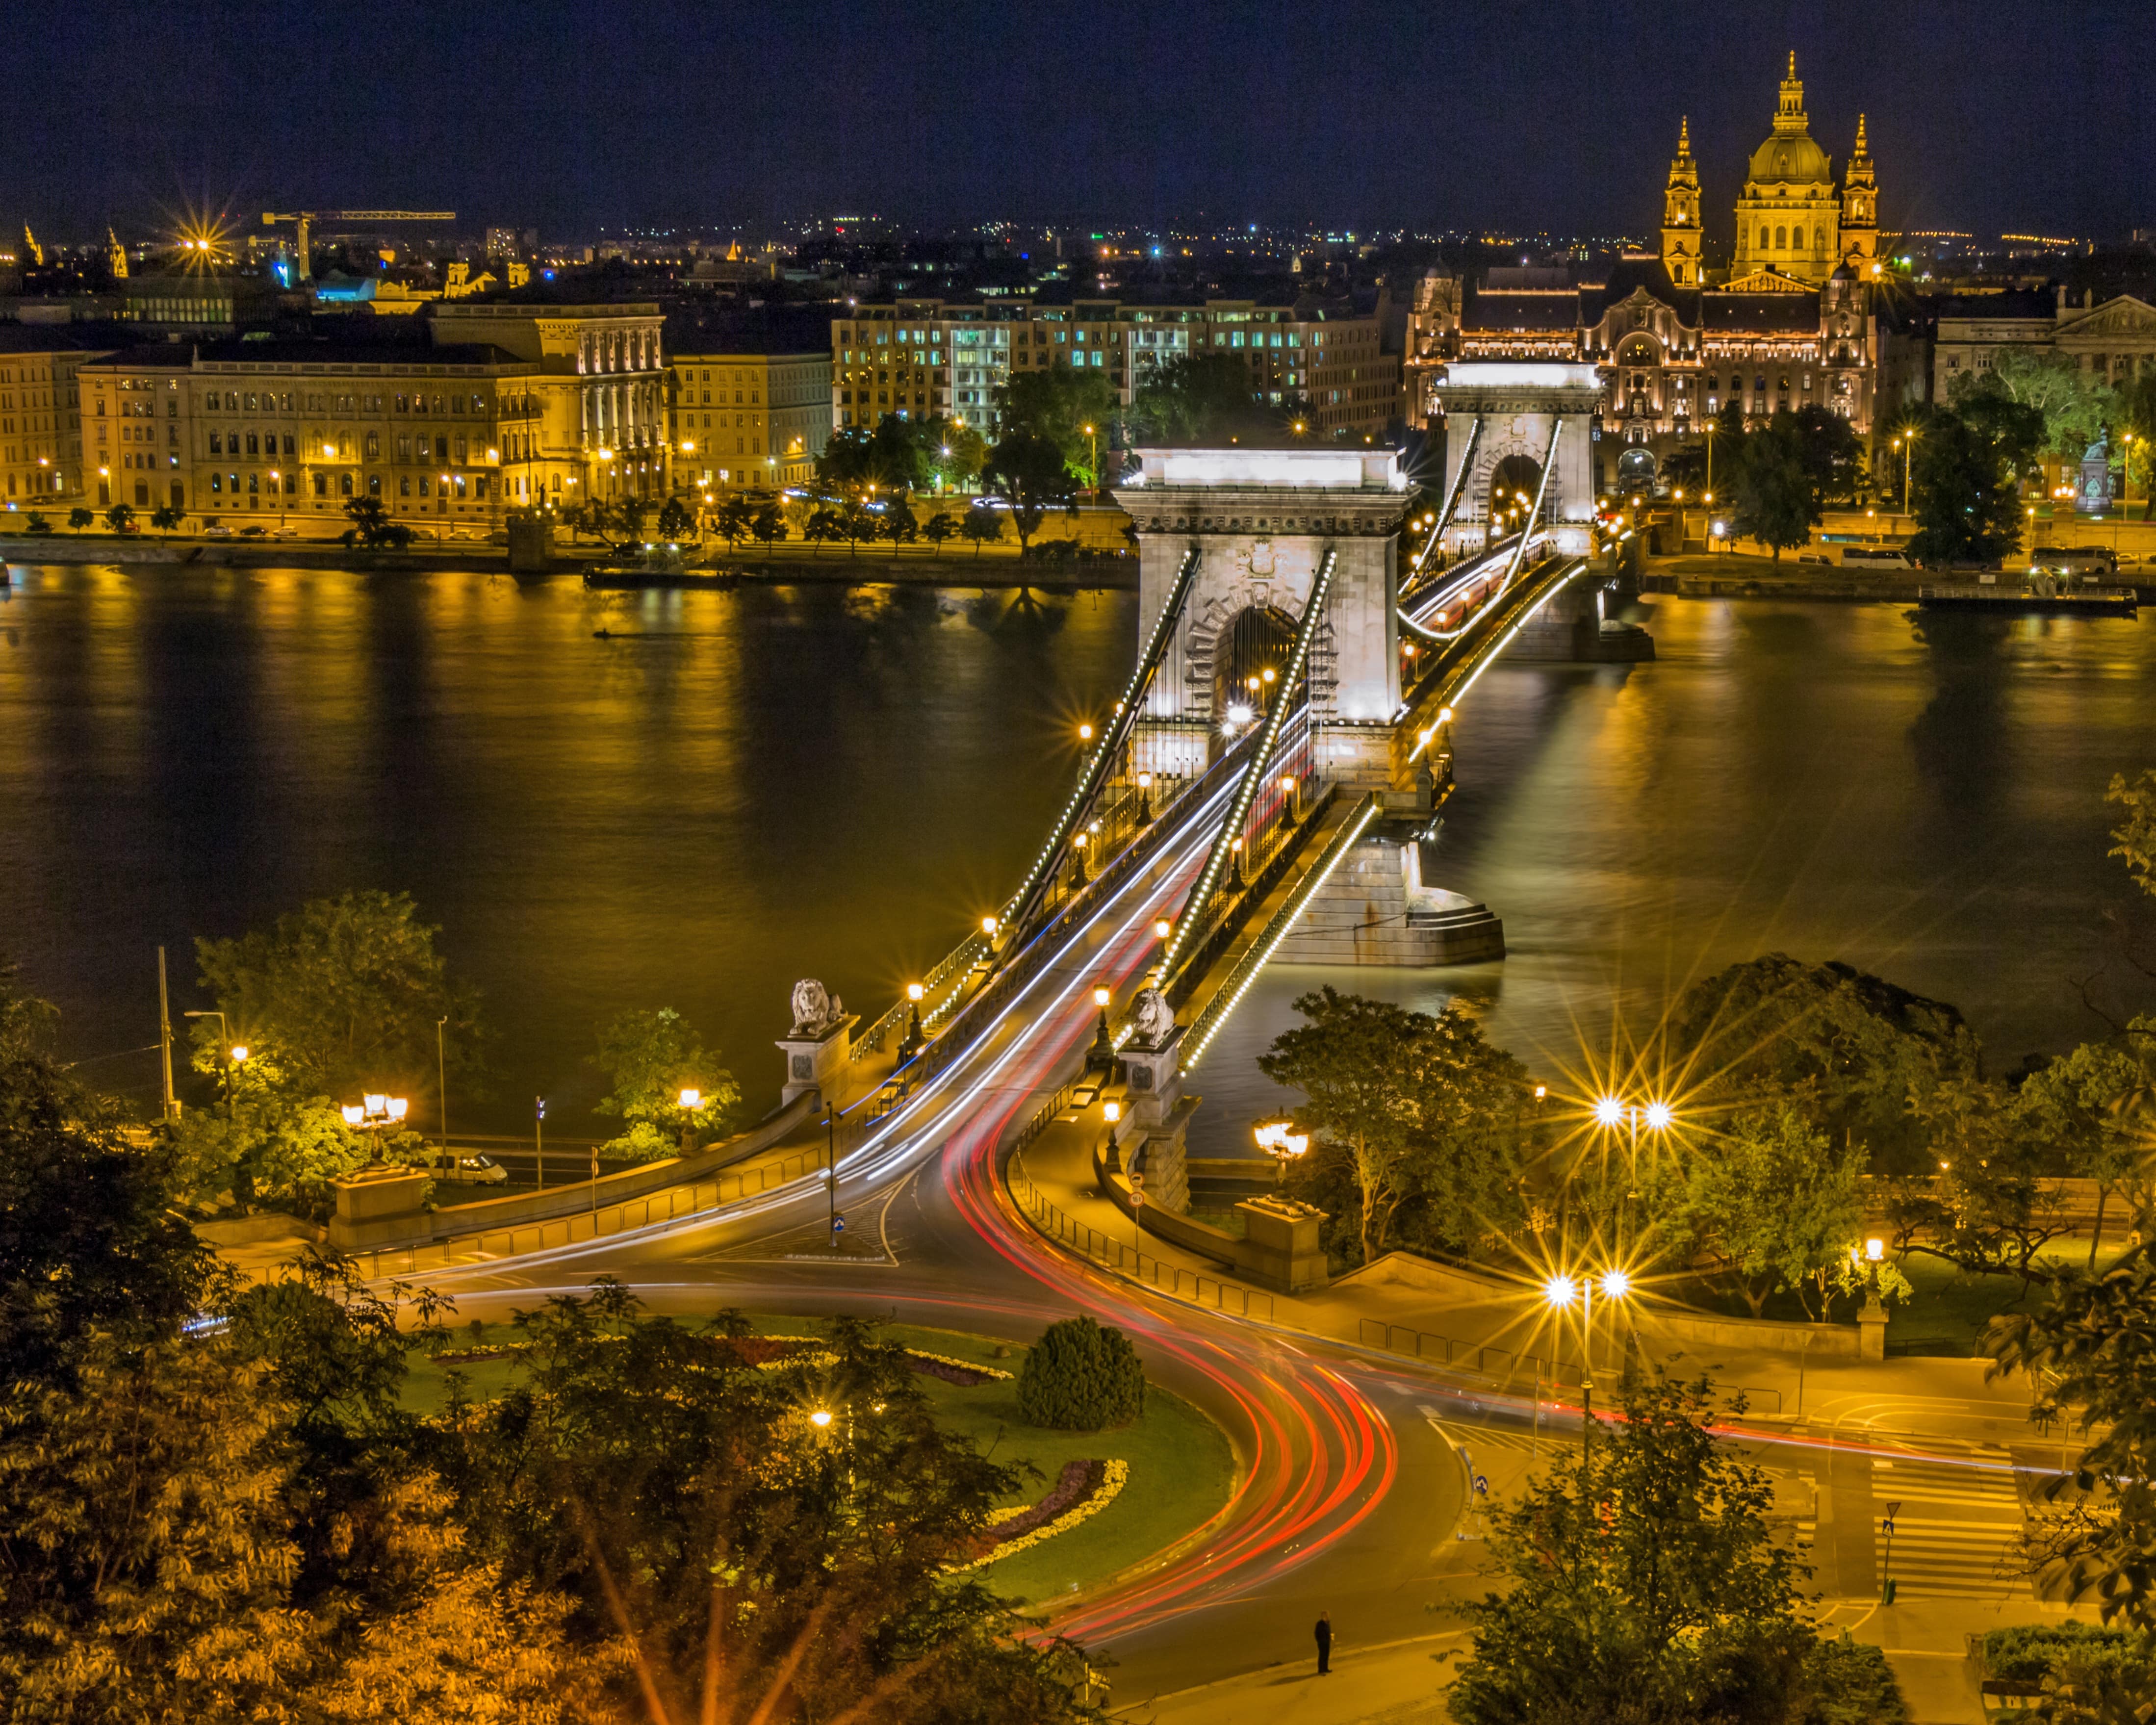 Breathtaking views await you on your family holiday in Budapest